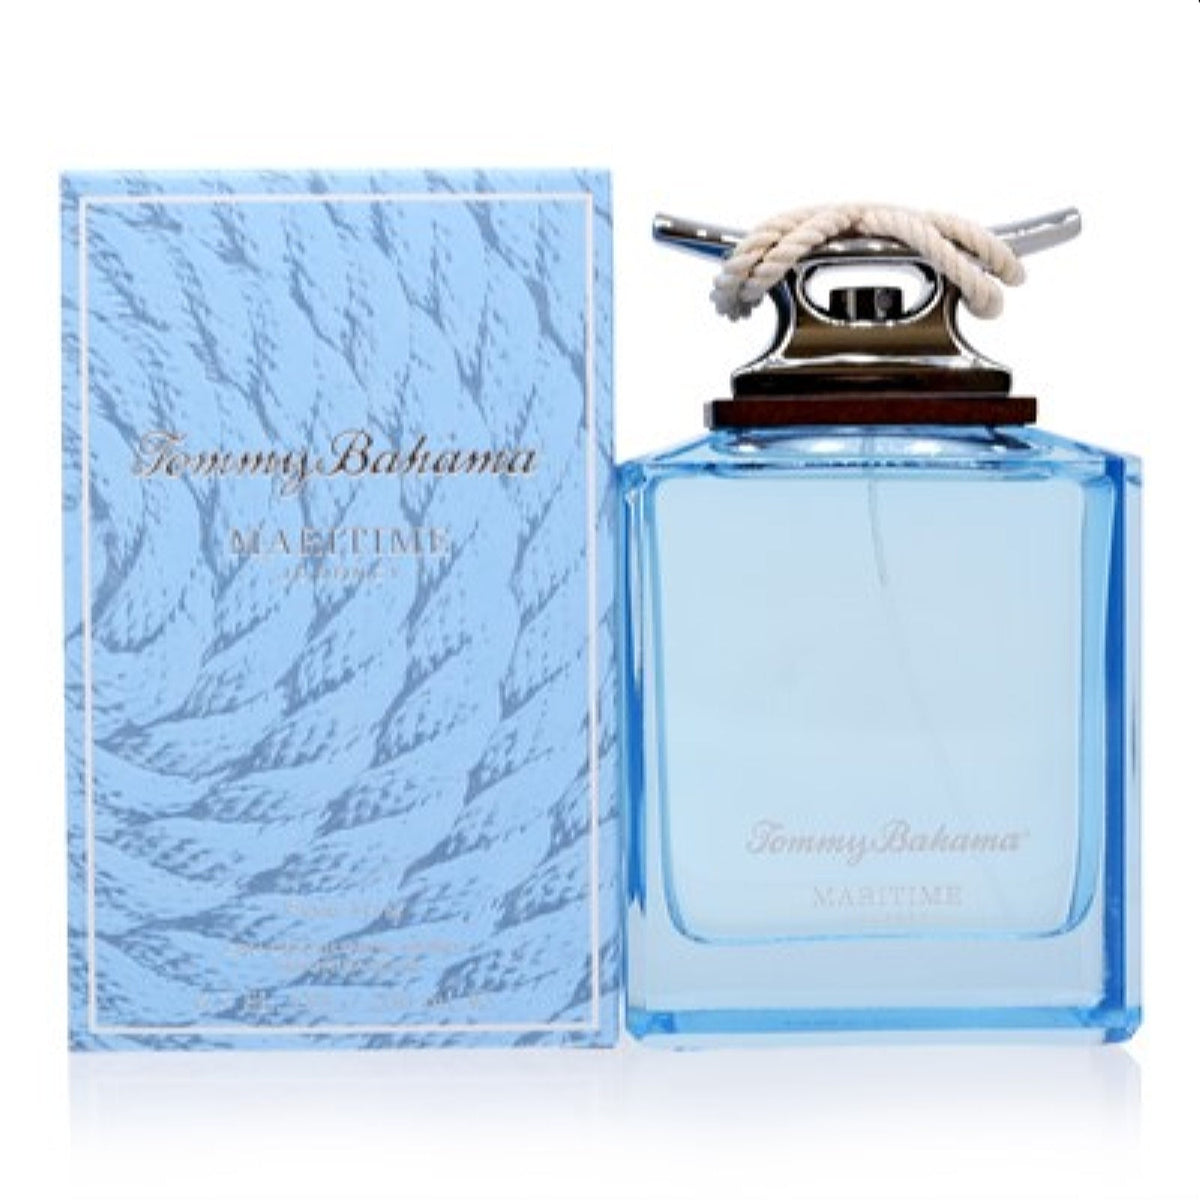 Tommy Bahama Maritime Journey Tommy Bahama Cologne Spray 6.7 Oz (200 Ml) For Men  